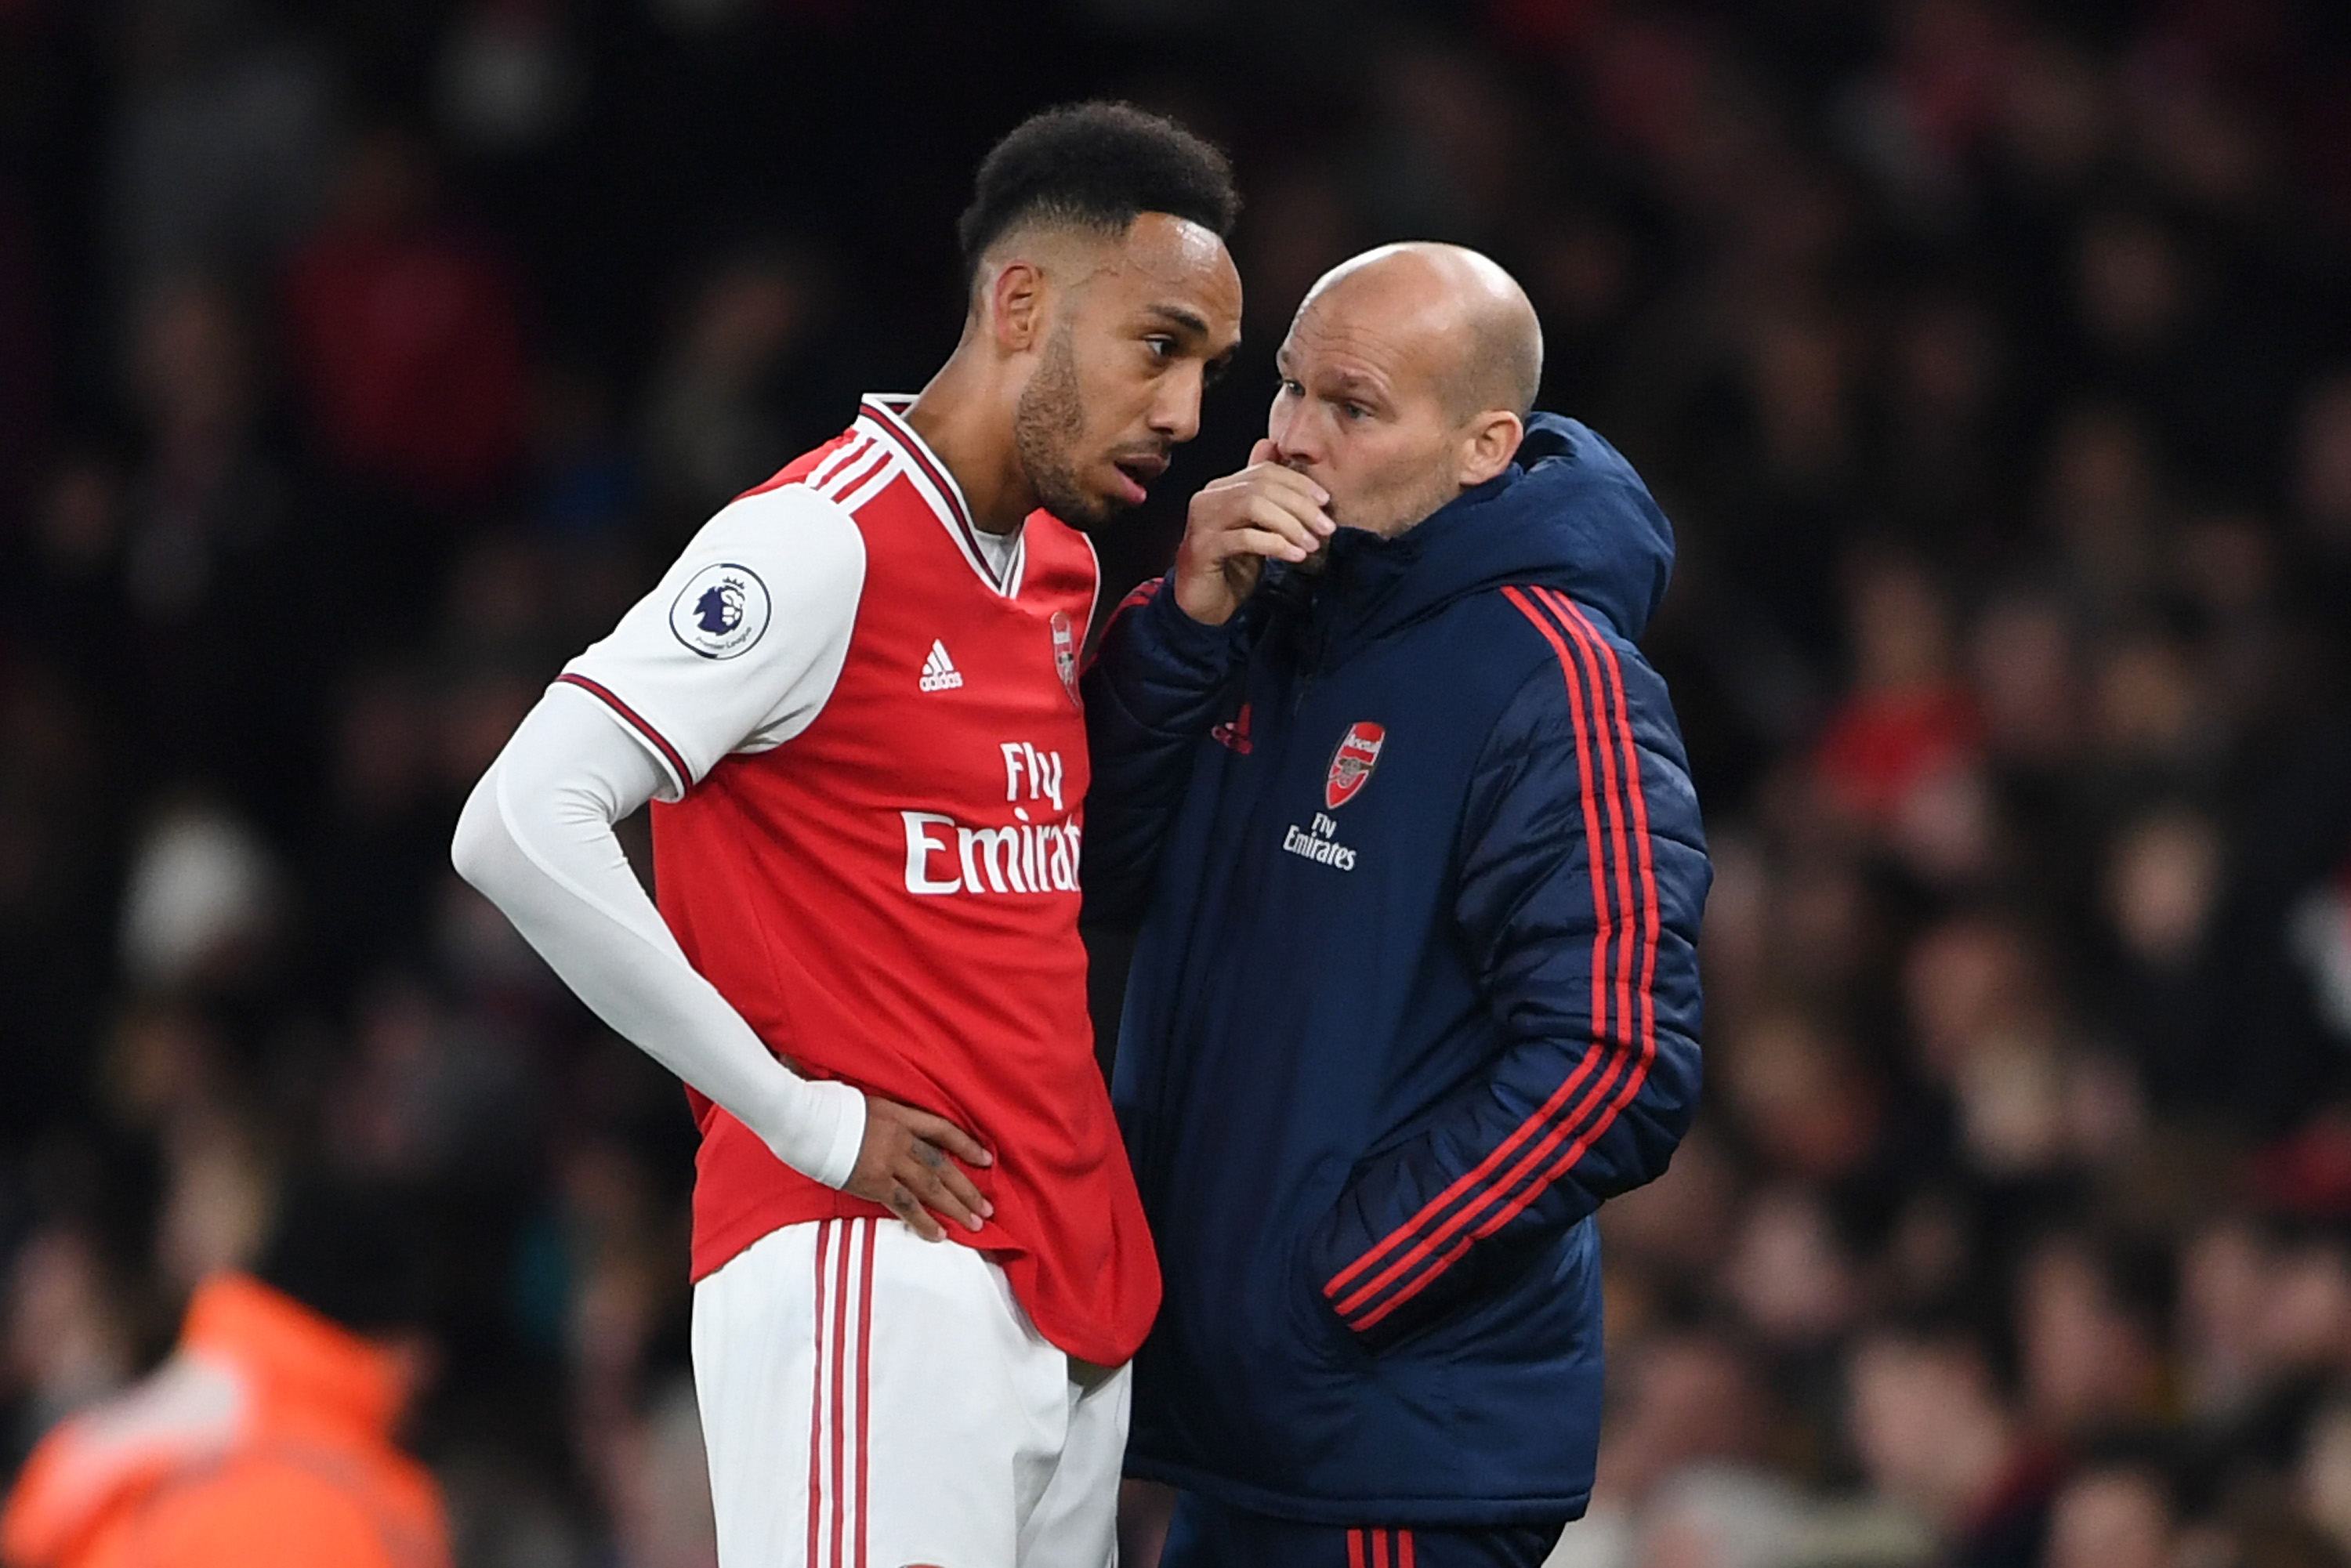 LONDON, ENGLAND - NOVEMBER 23: Freddie Ljungberg, Assistant Manager of Arsenal gives instructions to Pierre-Emerick Aubameyang of Arsenal during the Premier League match between Arsenal FC and Southampton FC at Emirates Stadium on November 23, 2019 in London, United Kingdom. (Photo by Harriet Lander/Getty Images)